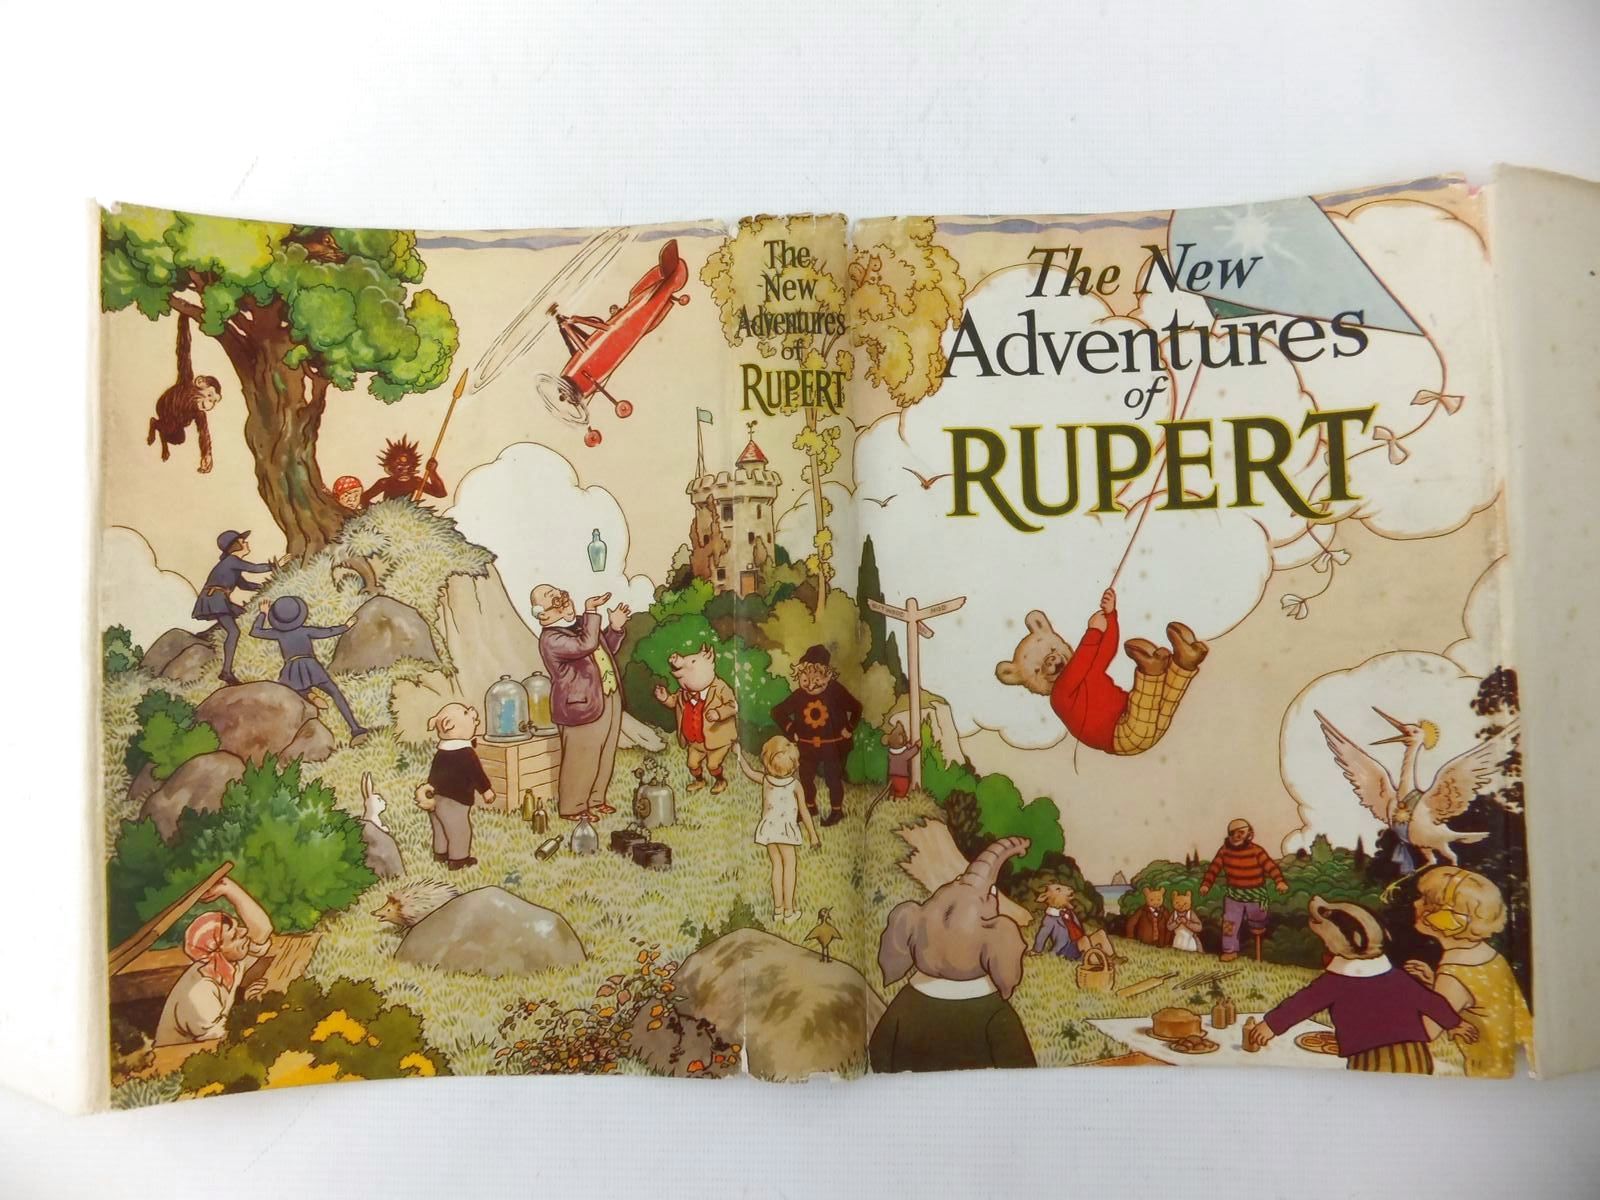 Photo of RUPERT ANNUAL 1936 - THE NEW ADVENTURES OF RUPERT written by Bestall, Alfred illustrated by Bestall, Alfred published by Daily Express (STOCK CODE: 2118169)  for sale by Stella & Rose's Books